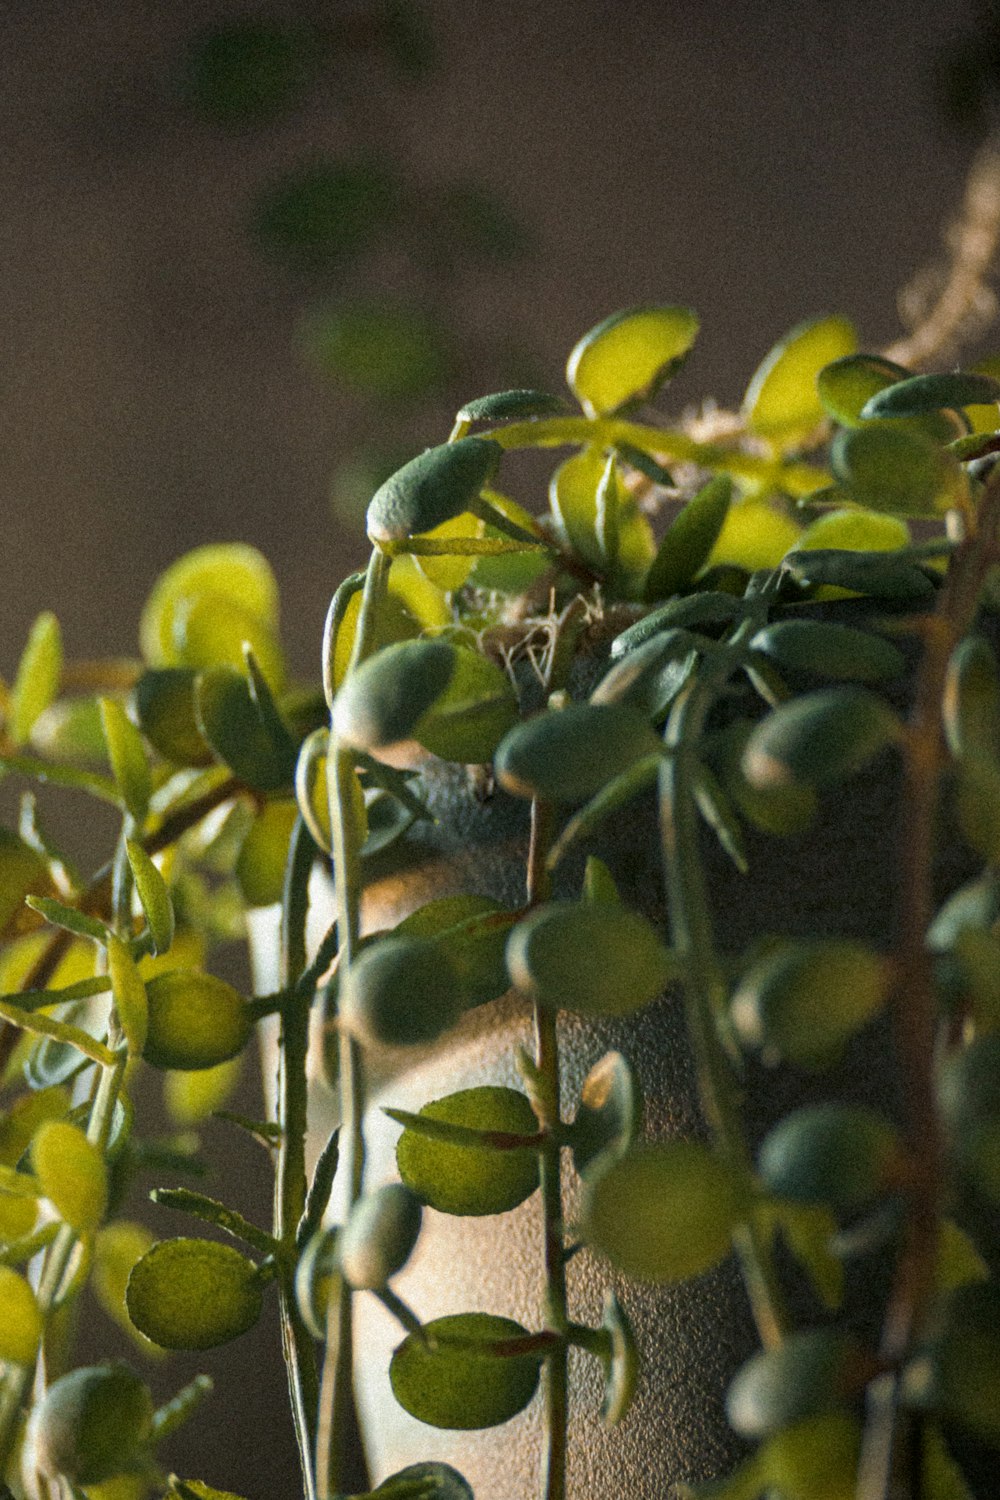 green and yellow round fruits